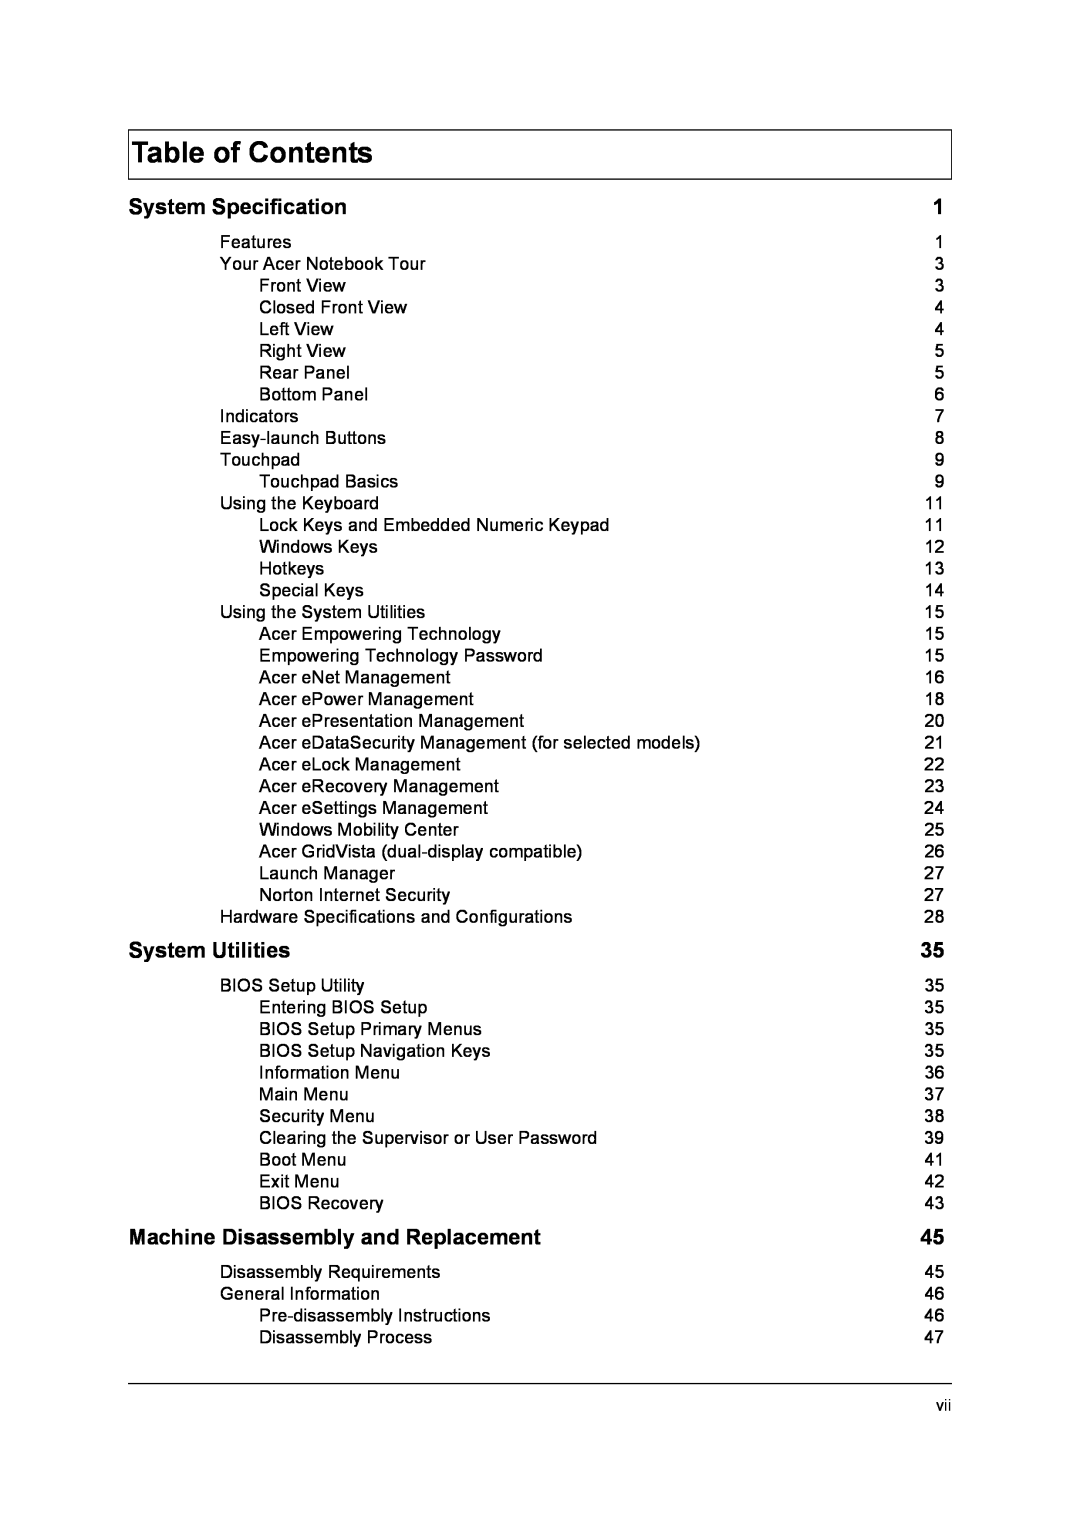 Acer 4315 manual System Specification, System Utilities, Machine Disassembly and Replacement, Table of Contents 